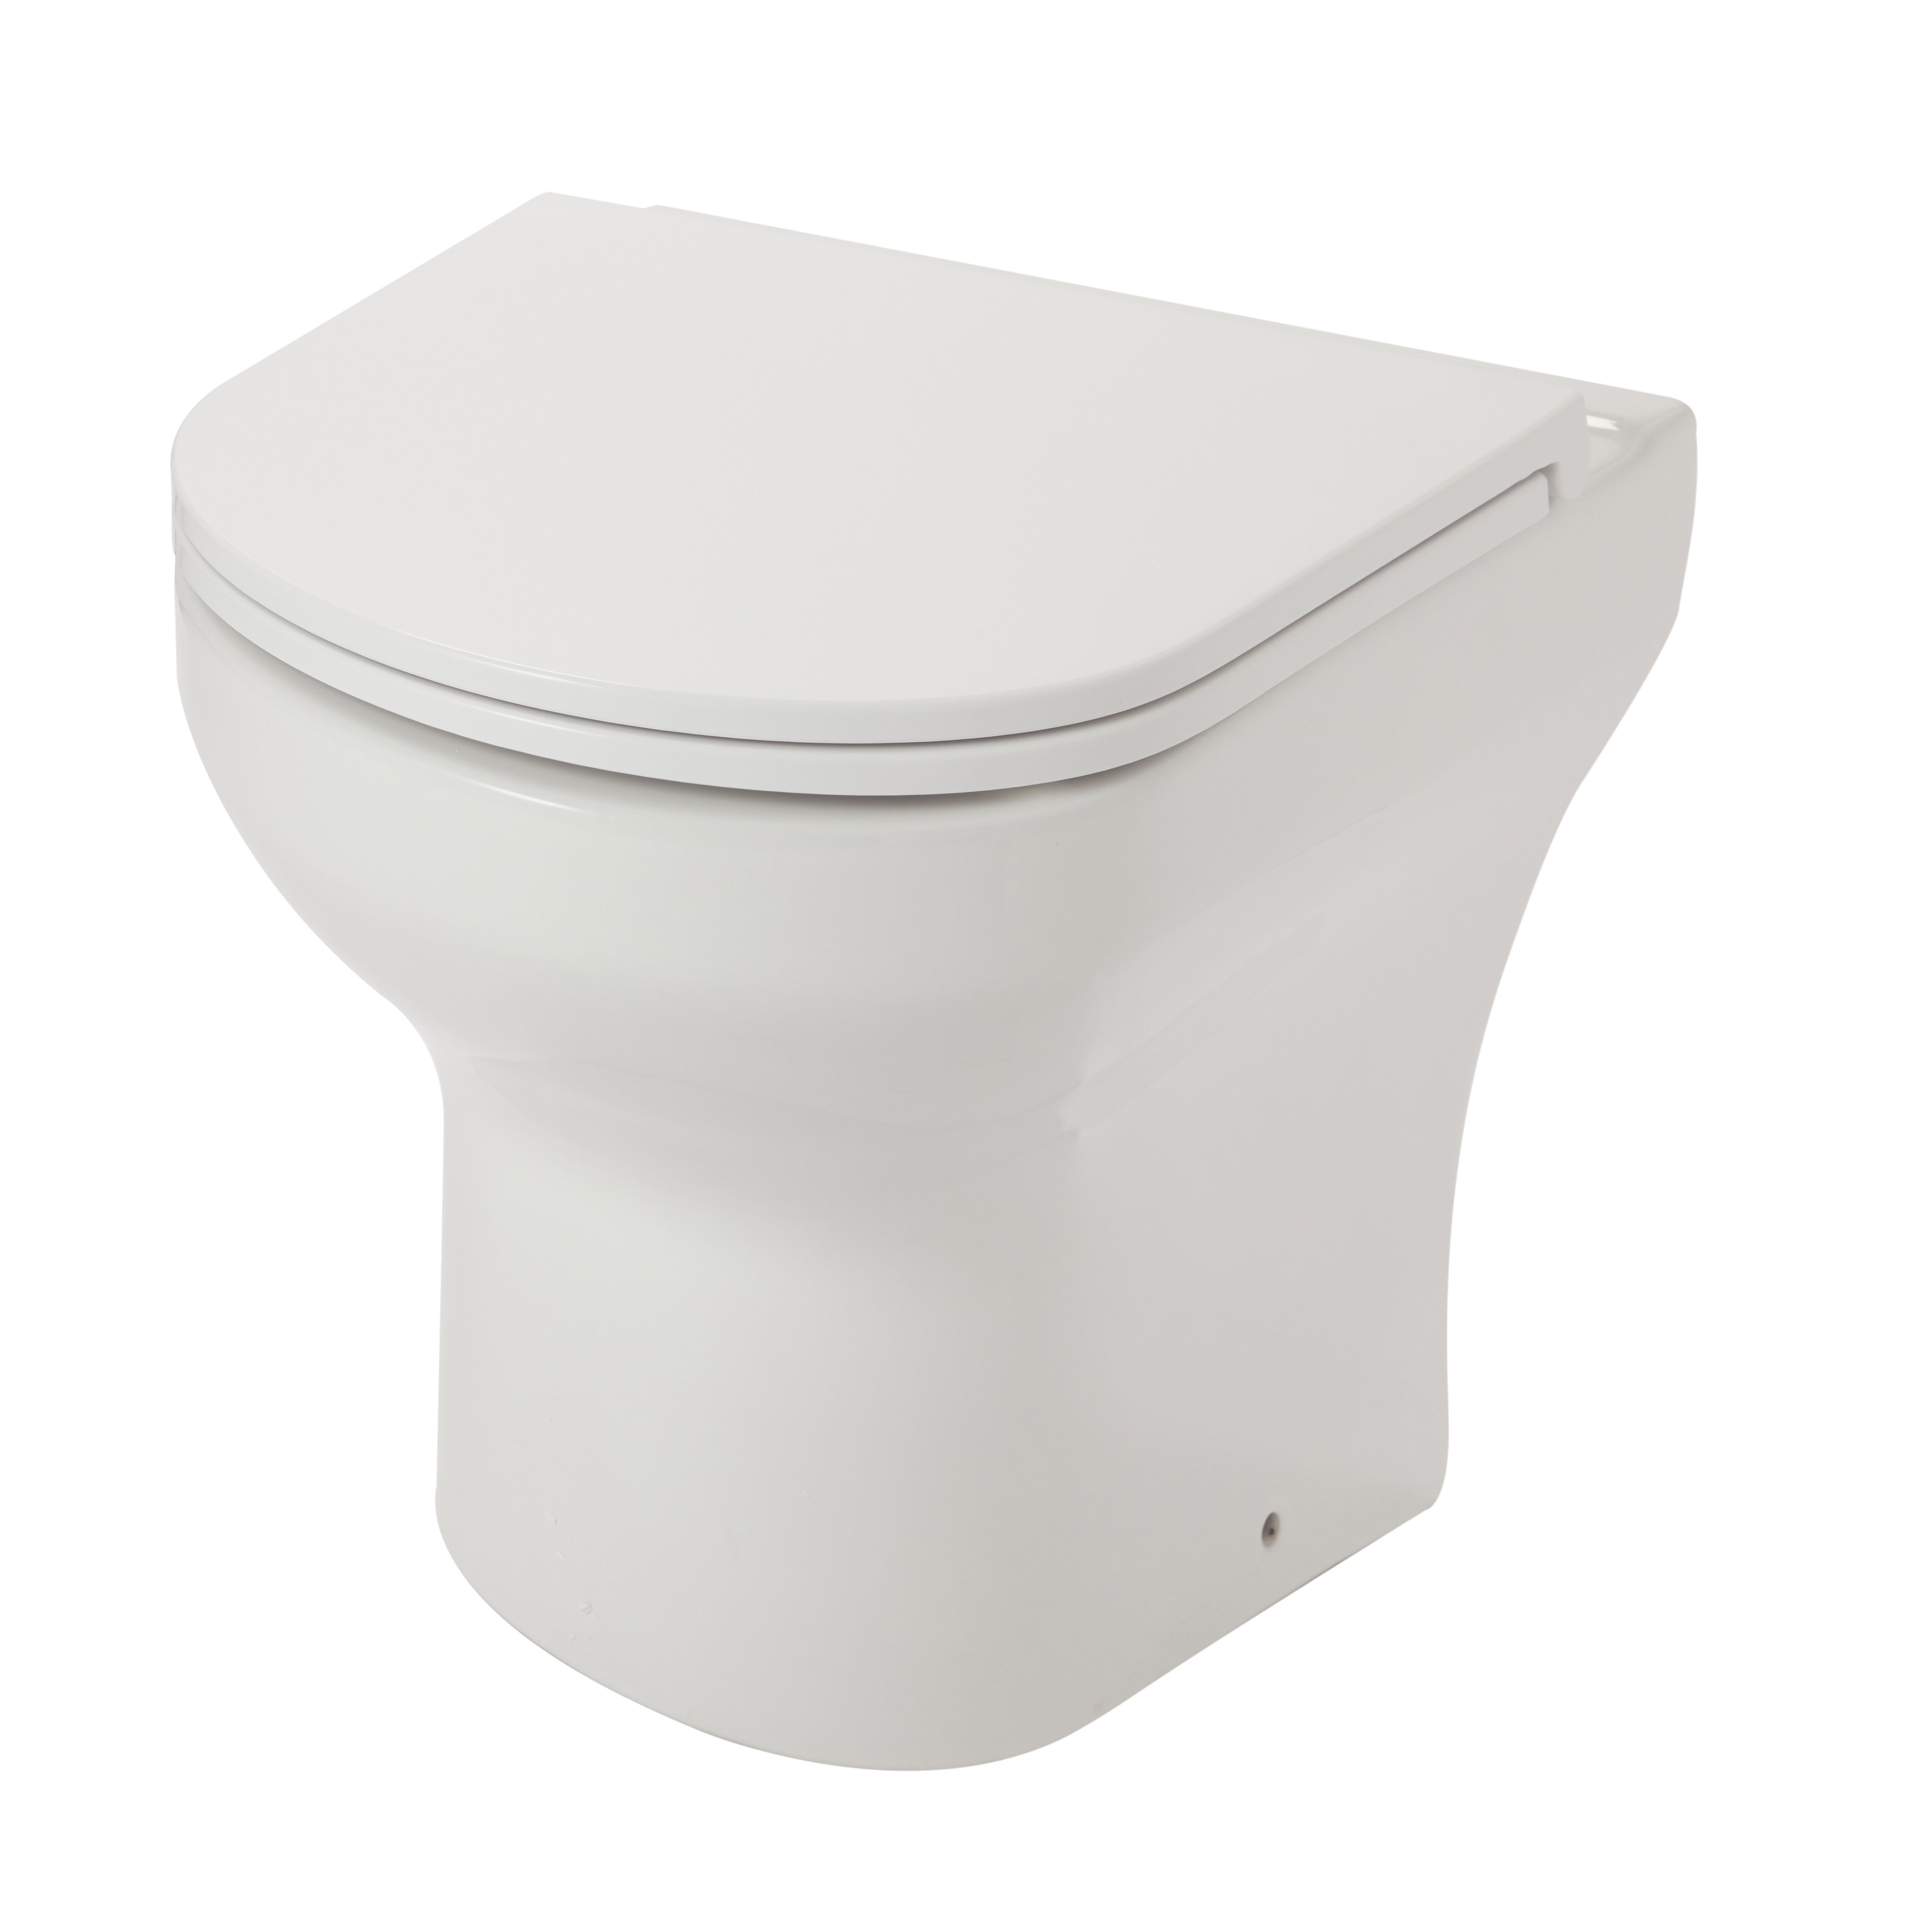 GoodHome Cavally Sandwich White D-shaped Slim Soft close Toilet seat